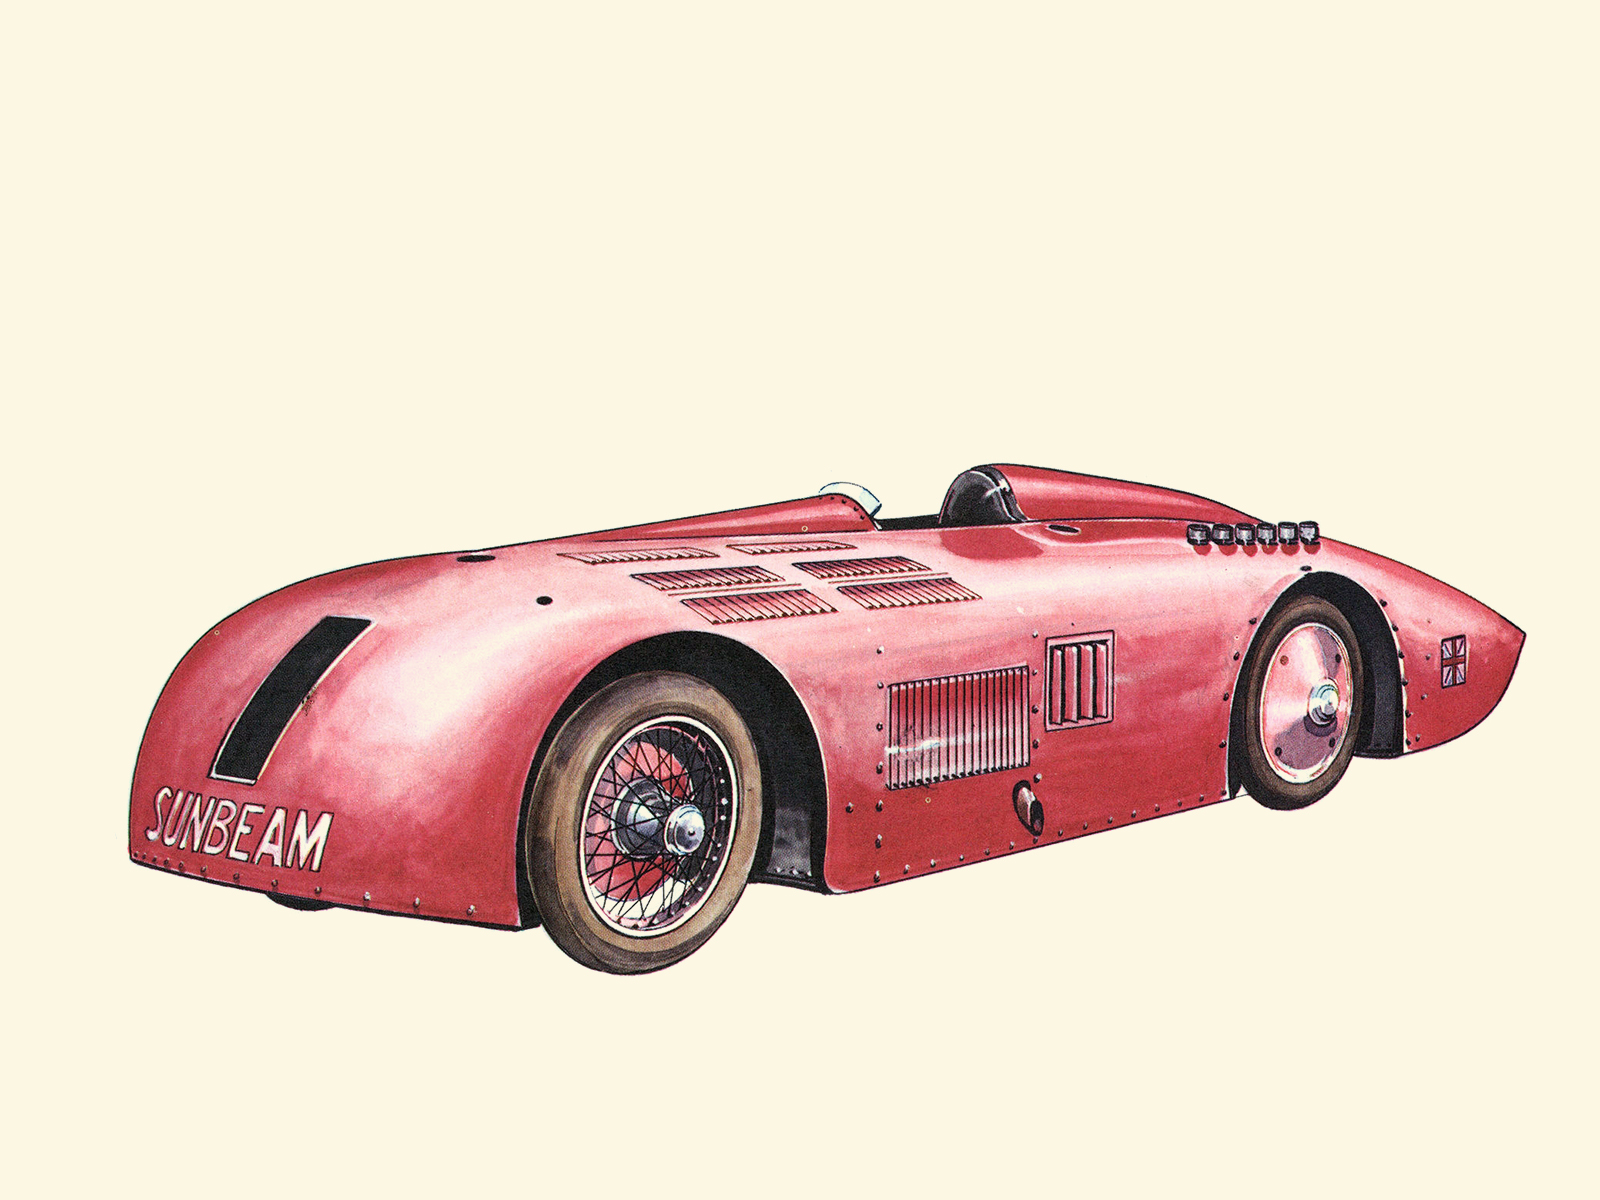 1927 Sunbeam (H. Segrave 203.79 mph): Illustrated by Piet Olyslager